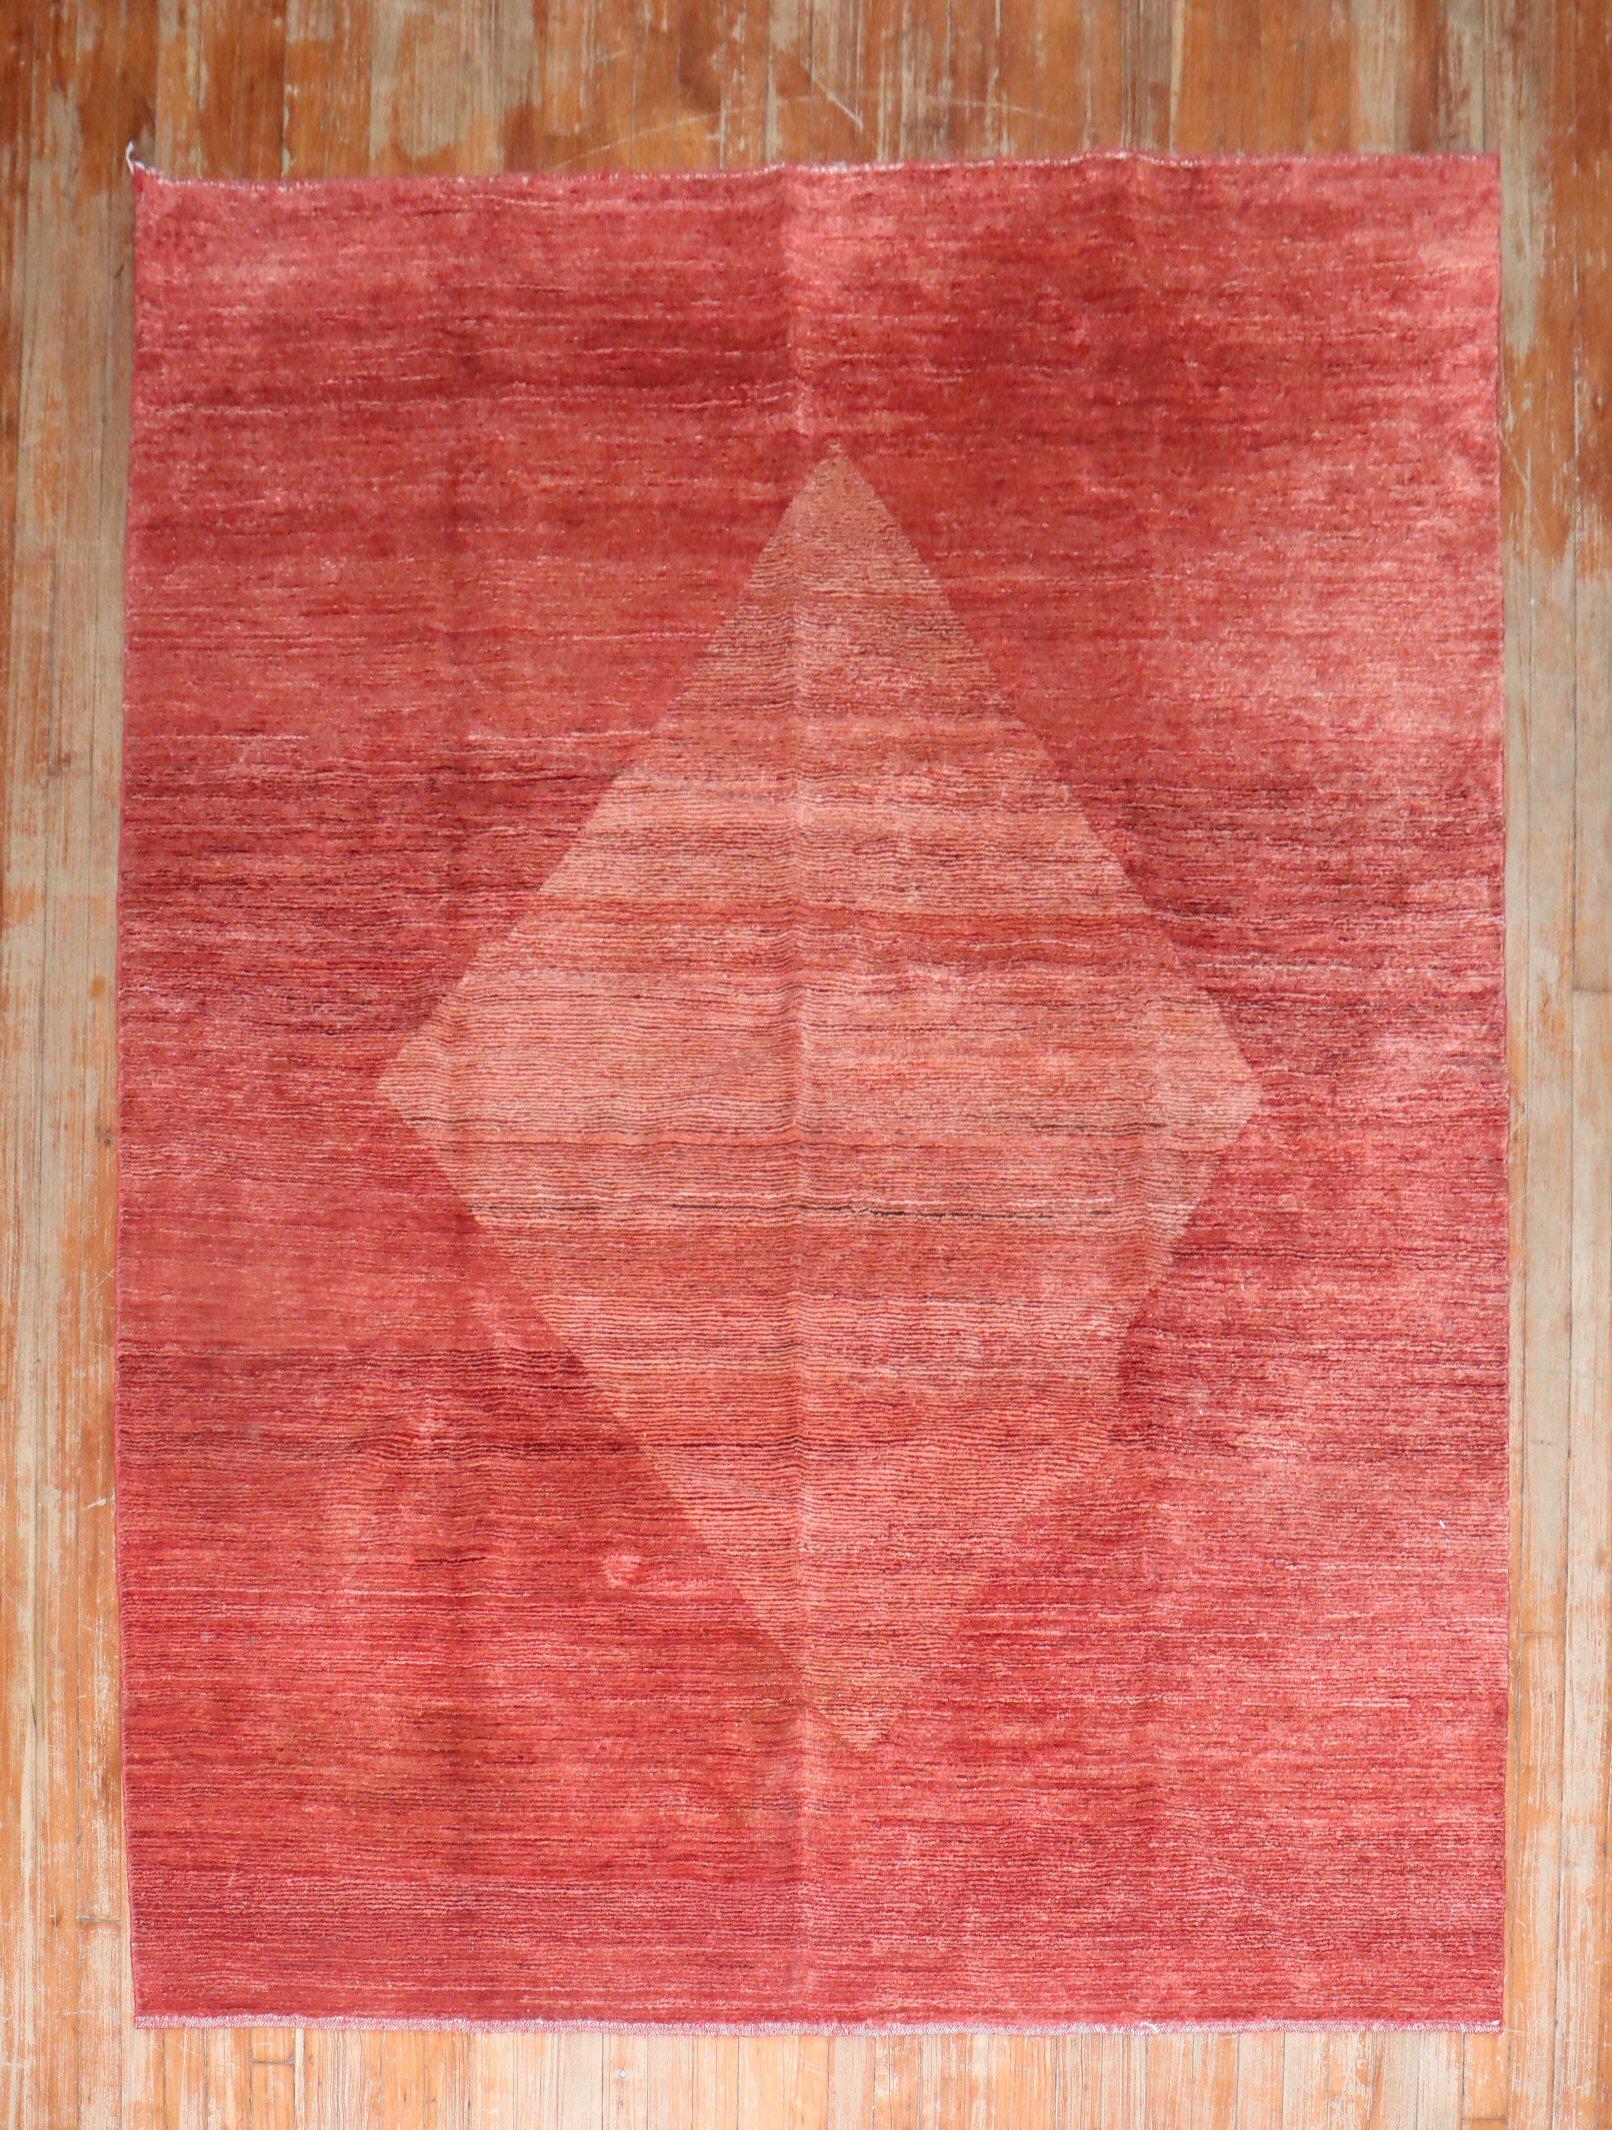 One of a kind intermediate size Persian Gabbeh rug from the late 20th century featuring a large irregular shape soft color medallion on a spacious borderless red ground

Measures: 5'10'' x 7'10''.